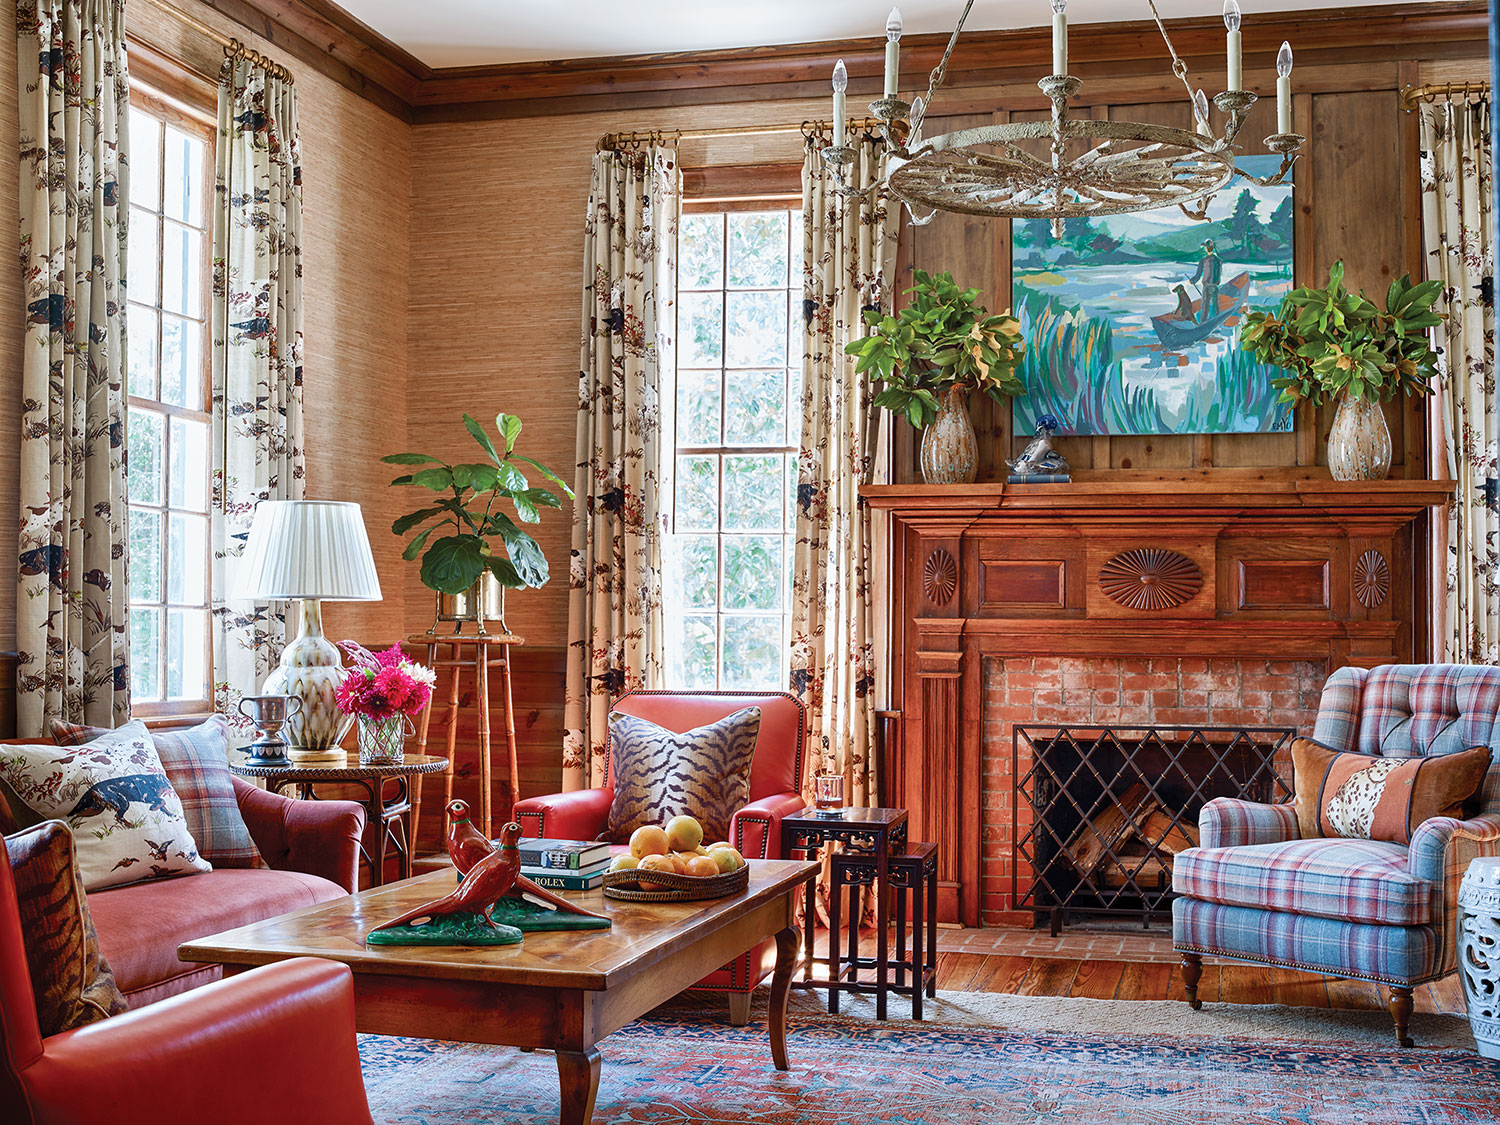 Photo of the Martin family's study designed by James Farmer. Red leather chairs, a plaid armchair and a painting featuring blues and greens bring color to the room, which features a neutral grass wallcovering, natural heart pine paneling and a brick fireplace with antique natural-wood wood mantel. A threadbare Oriental rug ties the room together.